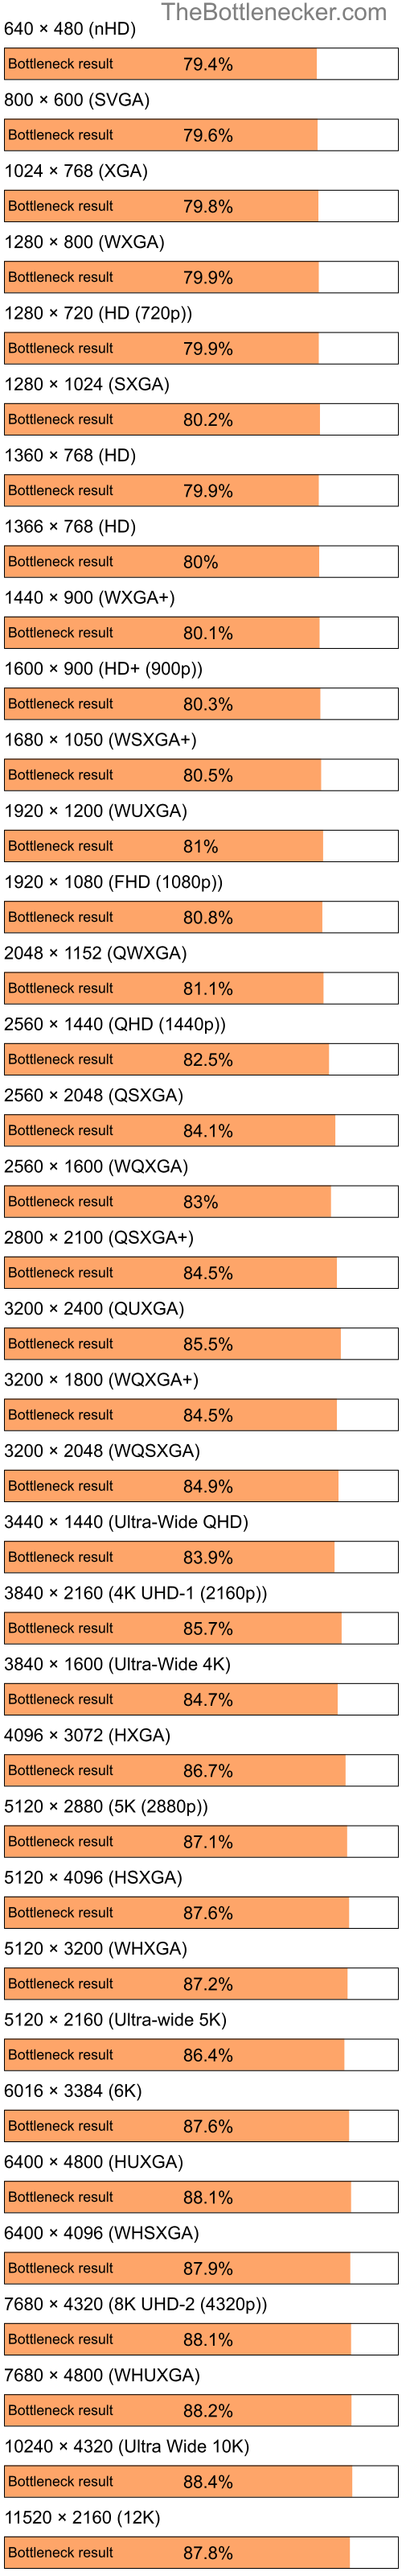 Bottleneck results by resolution for Intel Atom Z520 and AMD Radeon 9600 Family in General Tasks